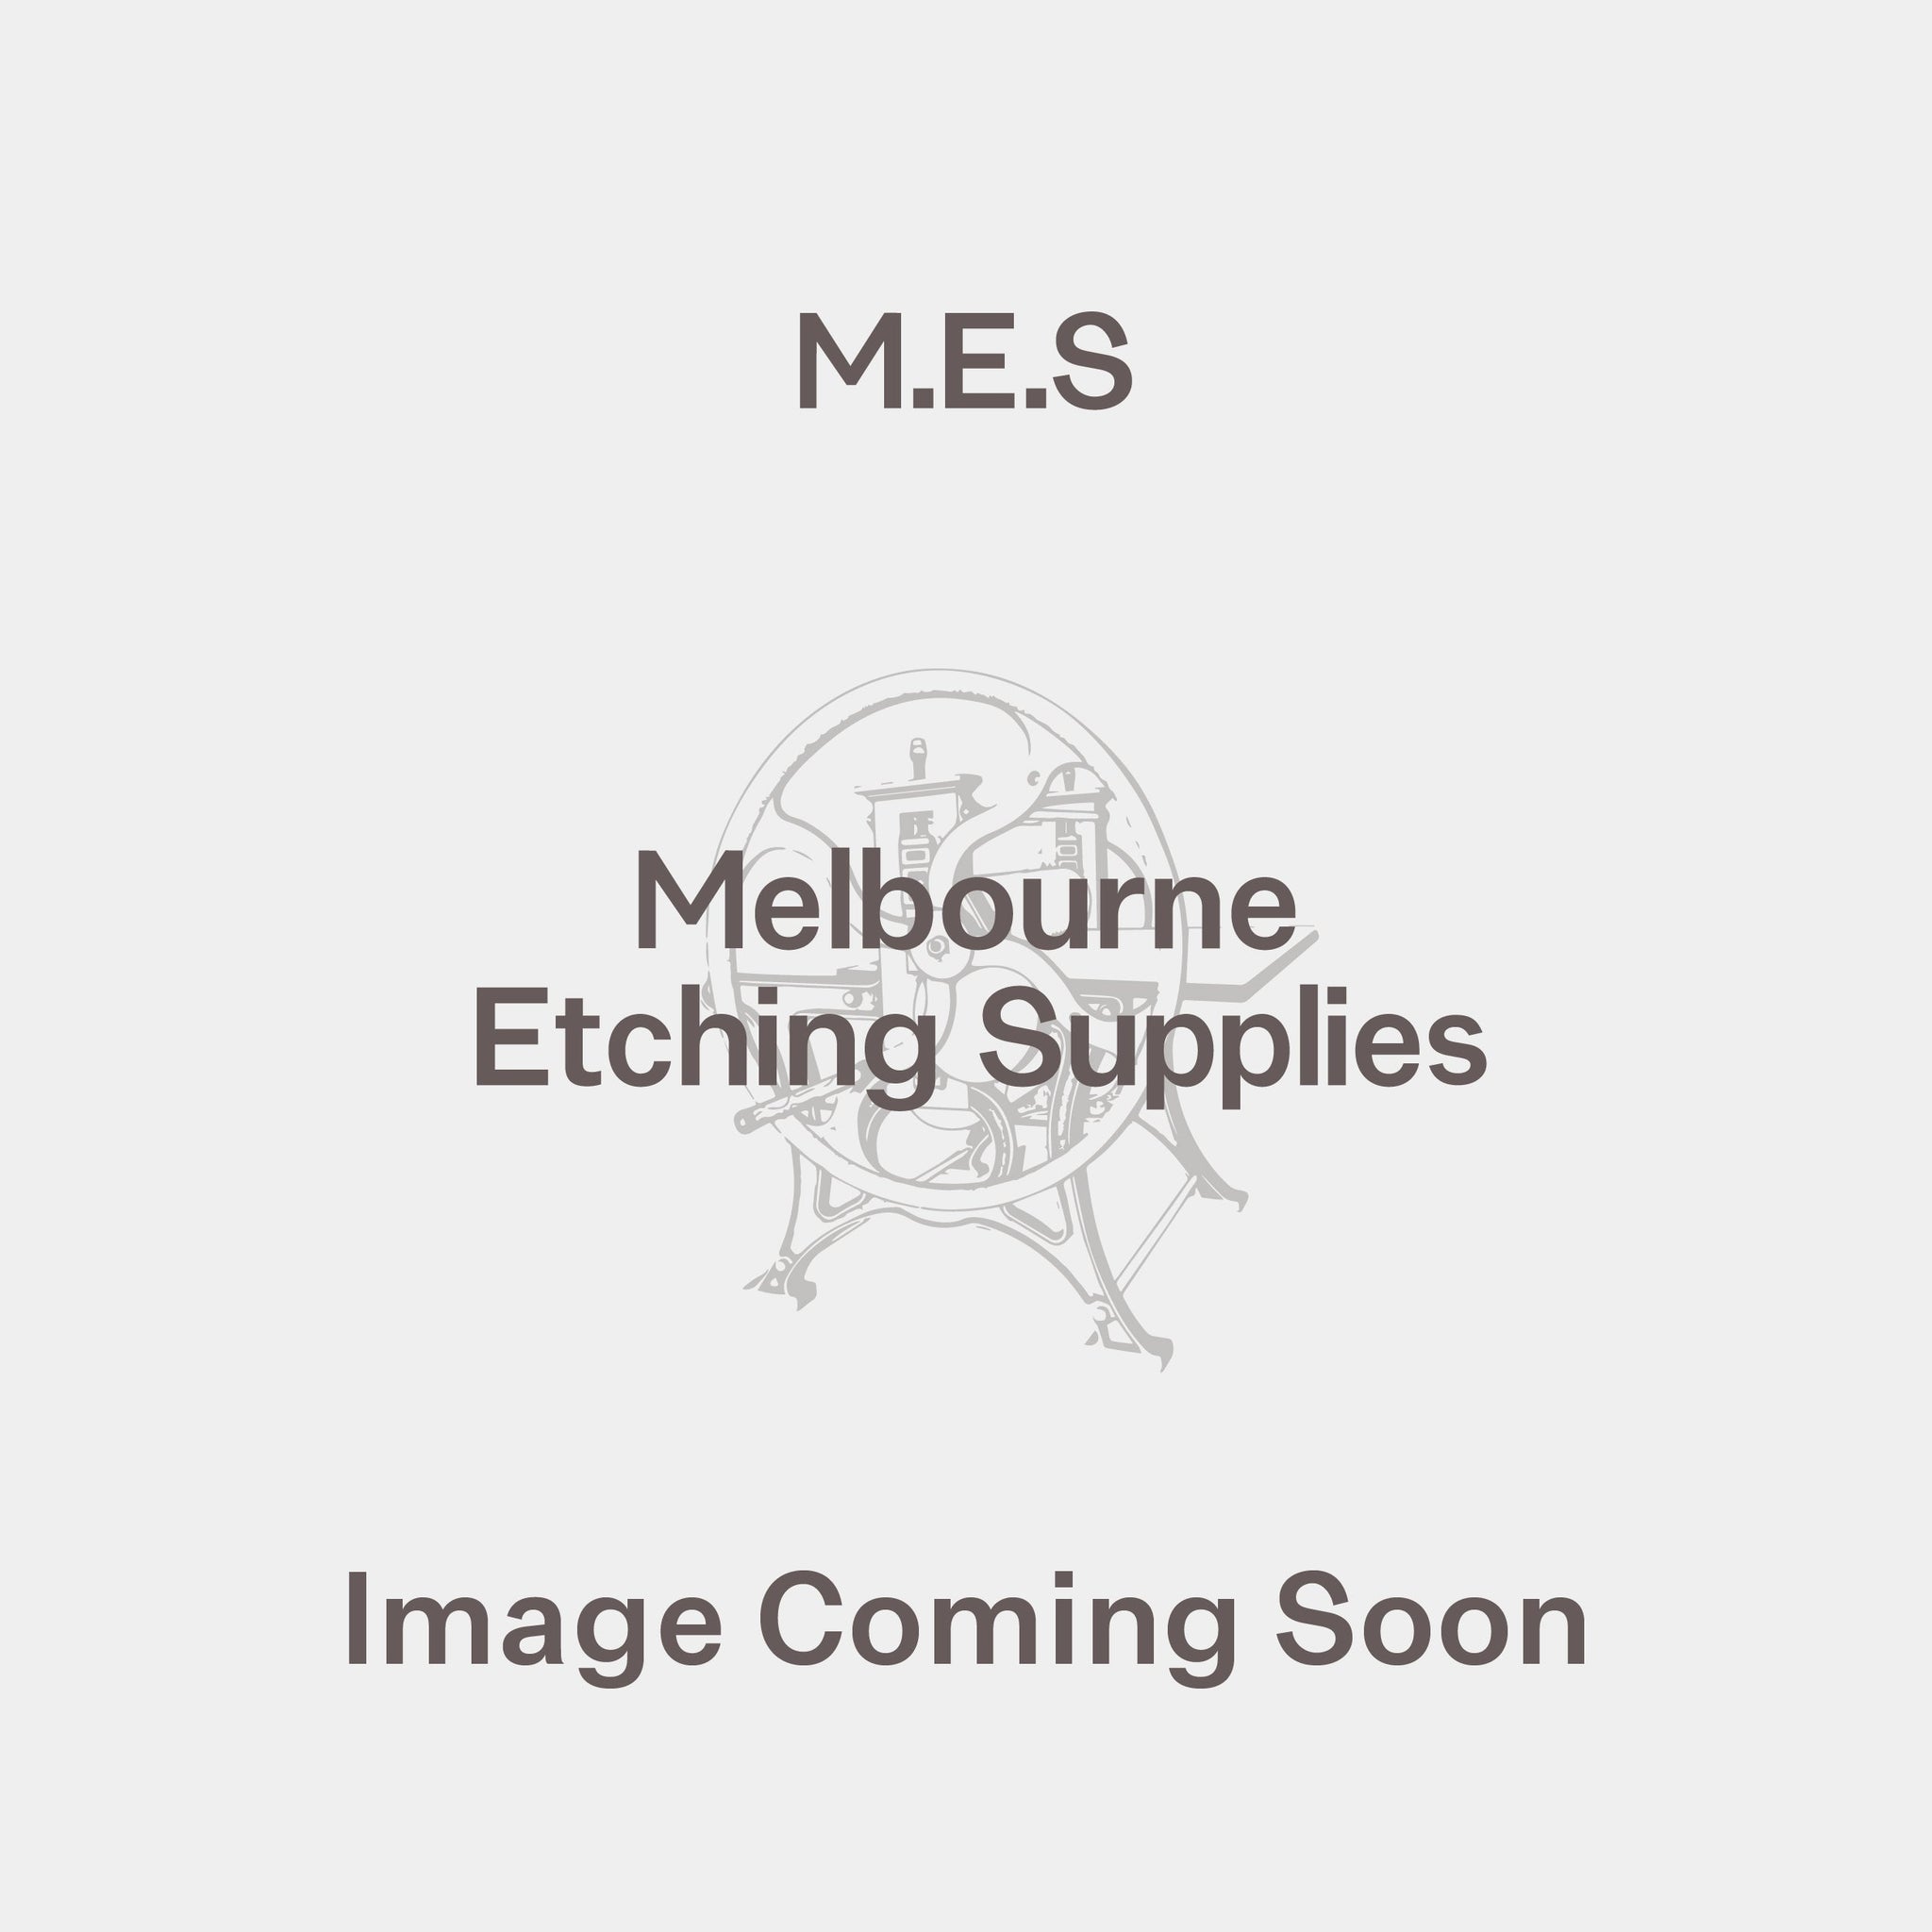 Vegetable Rush 48gsm - Melbourne Etching Supplies